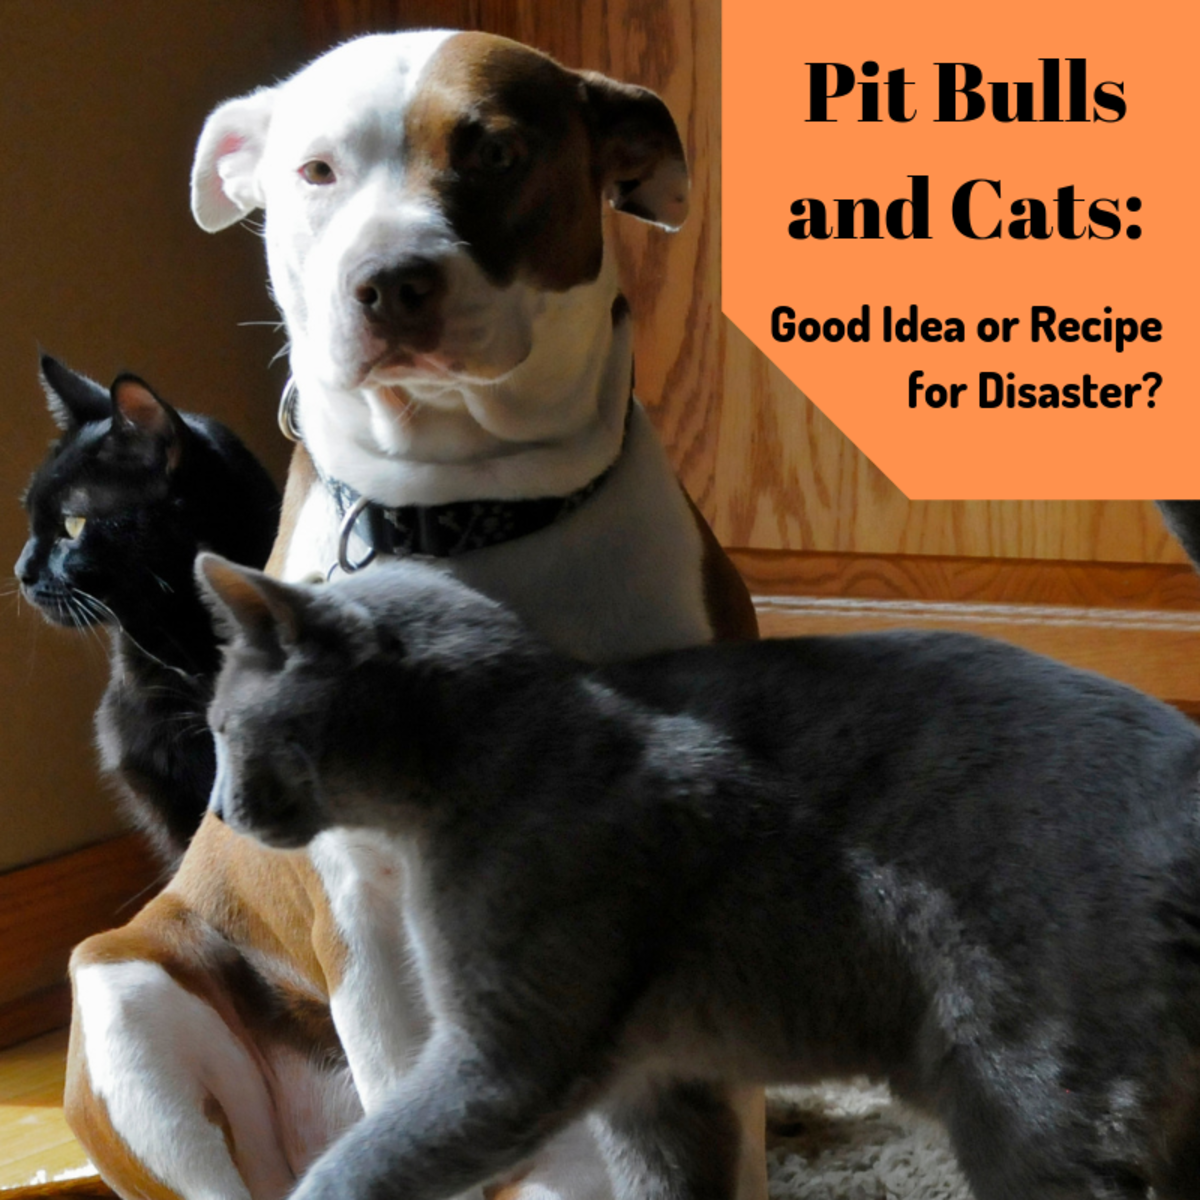 Are American Bully Good With Cats?